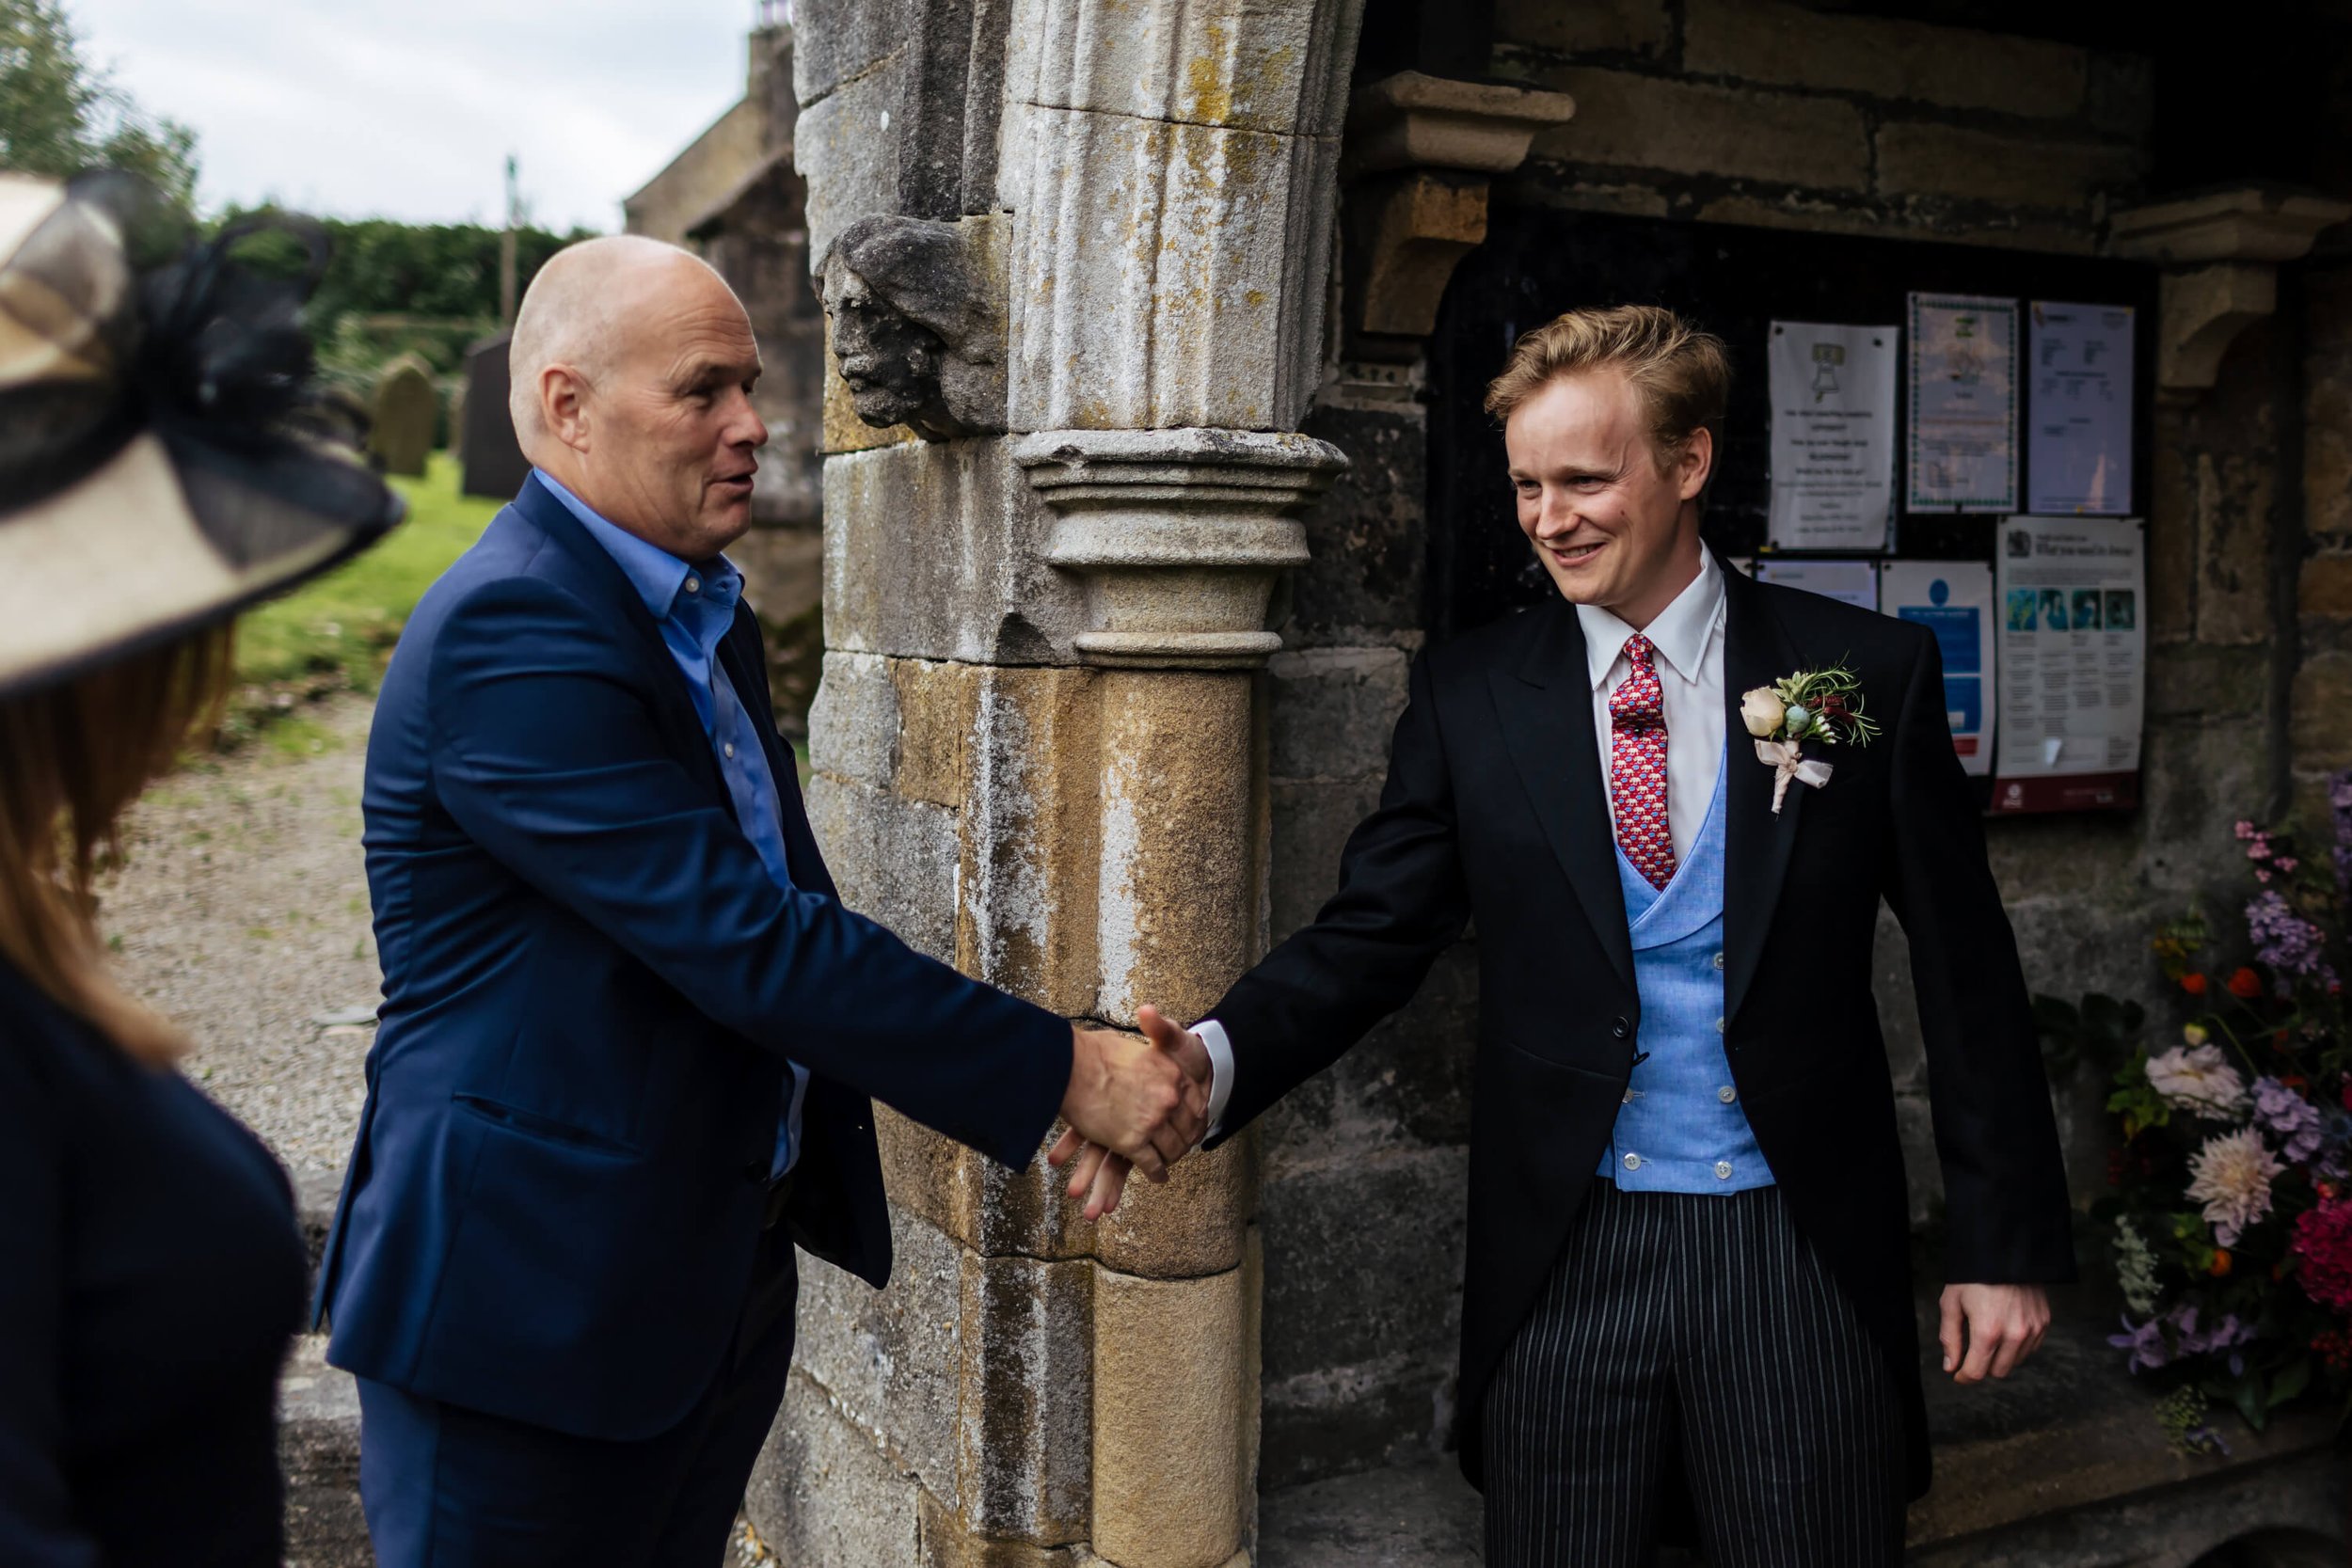 Groom shakes hands with wedding guests at the church